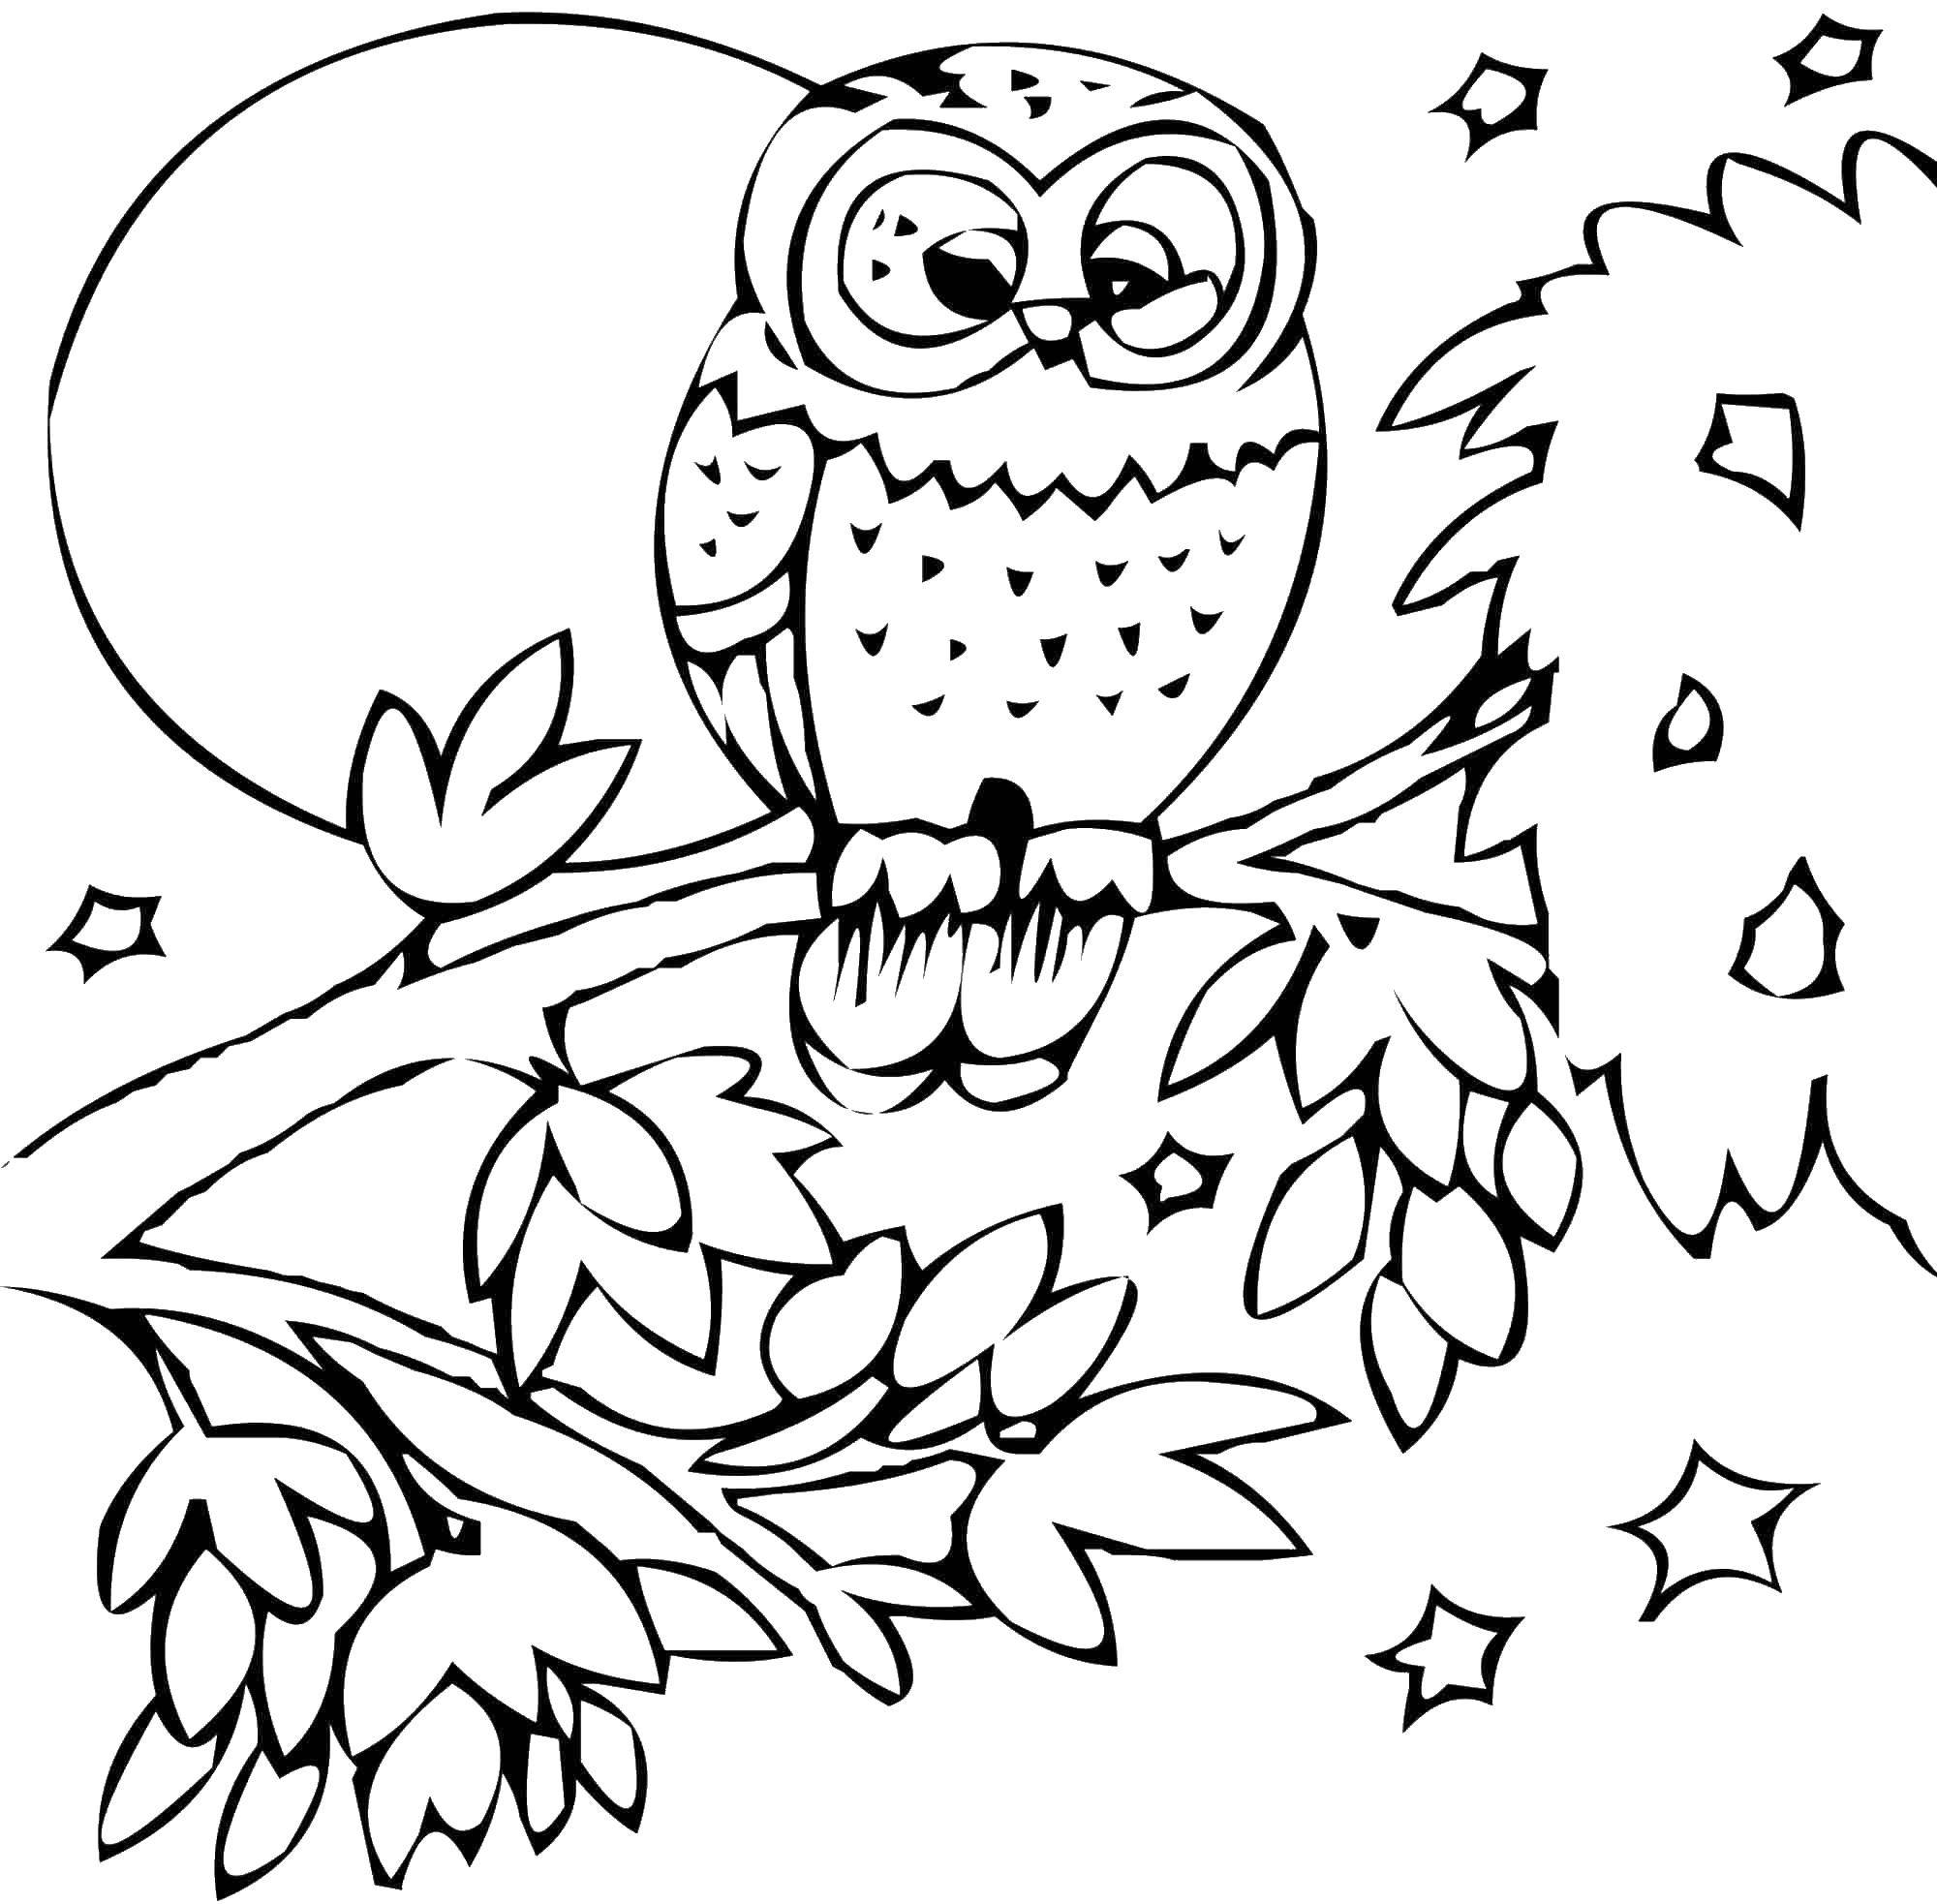 Coloring Owl sitting on a branch. Category birds. Tags:  the owl, sitting, branch.